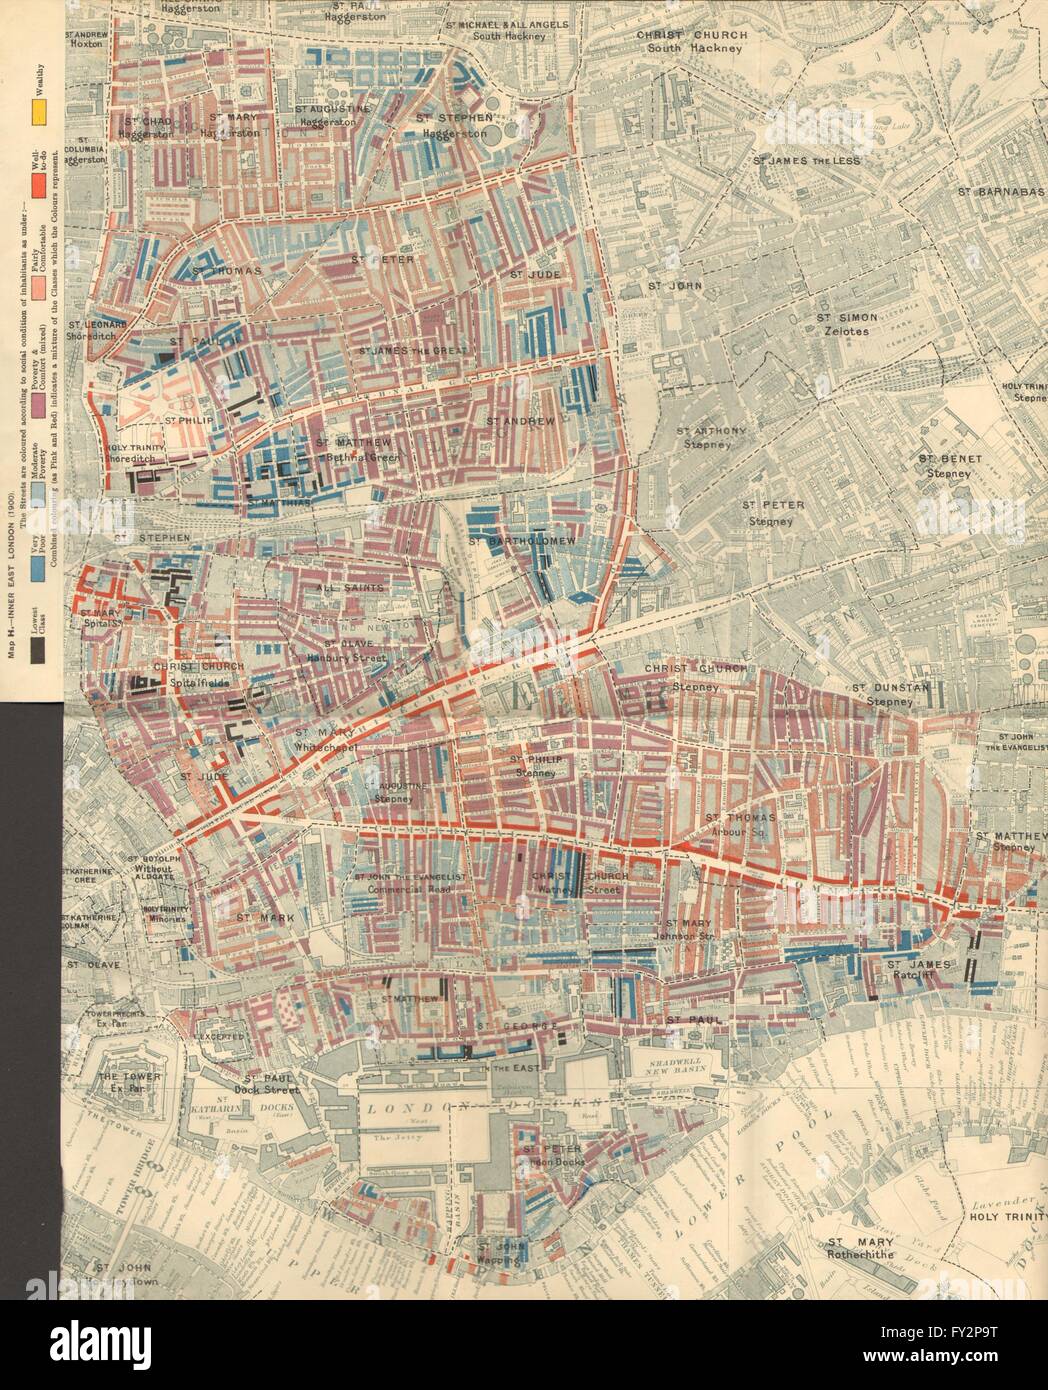 CHARLES BOOTH POVERTÀ MAPPA: Wapping Whitechapel Shoreditch Bethnal Green 1902 Foto Stock